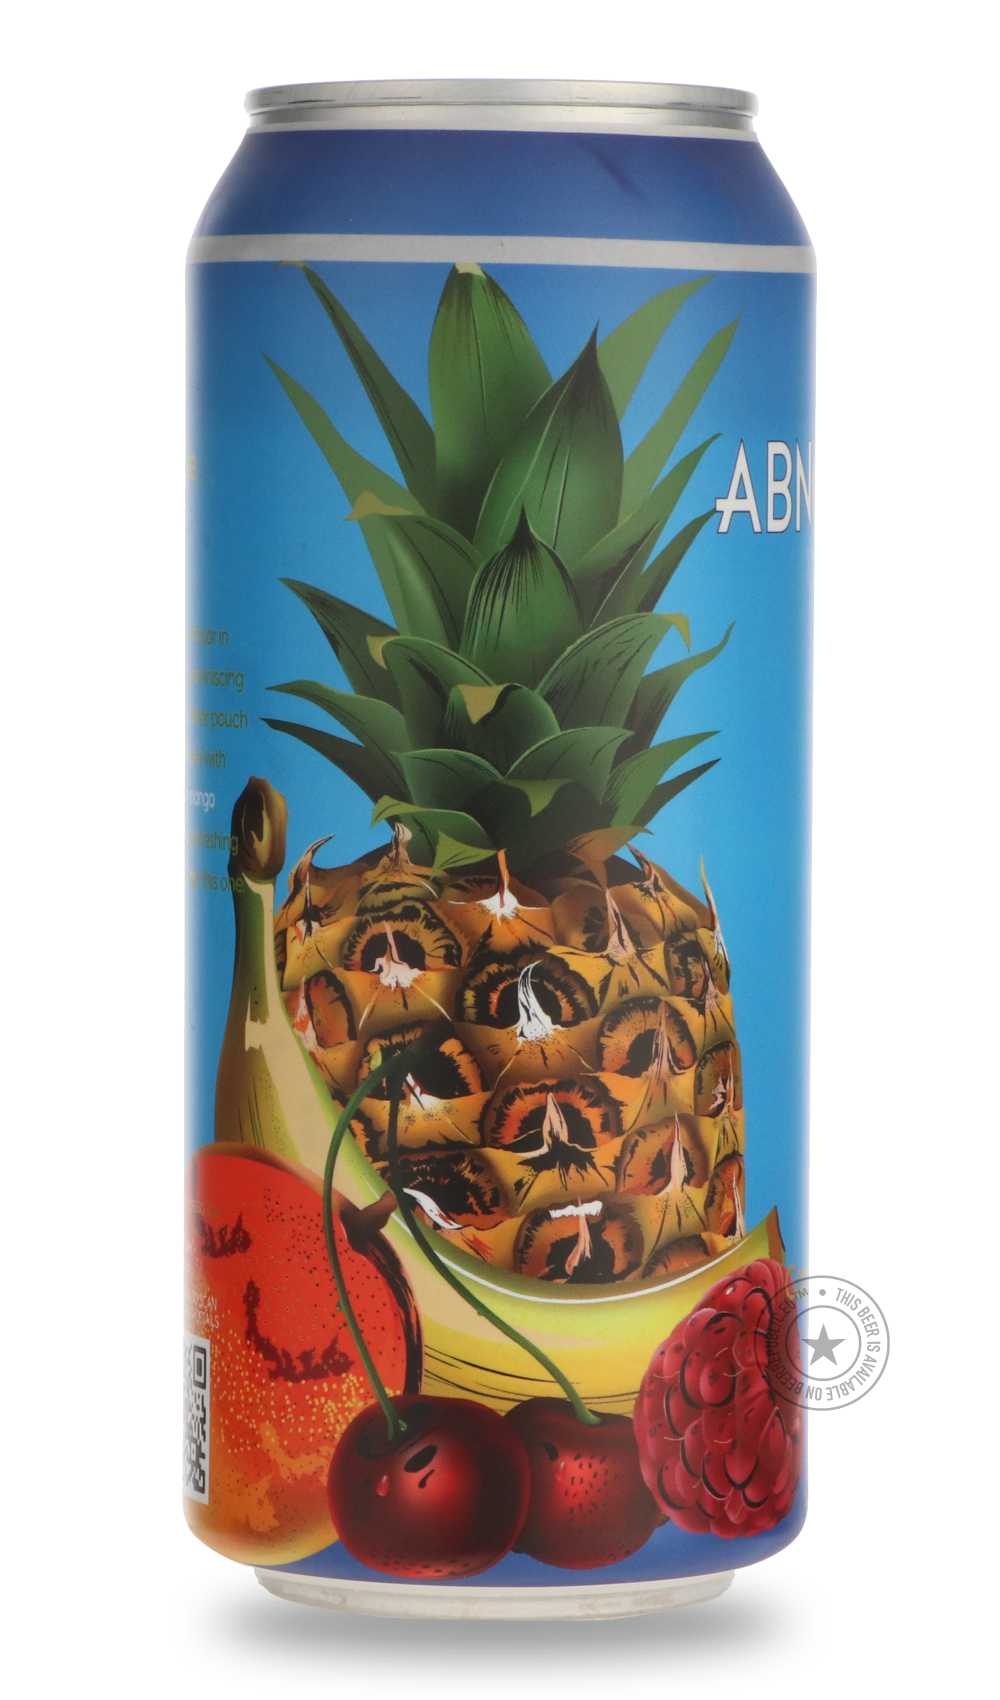 -Abnormal- Capri Smoothie-Sour / Wild & Fruity- Only @ Beer Republic - The best online beer store for American & Canadian craft beer - Buy beer online from the USA and Canada - Bier online kopen - Amerikaans bier kopen - Craft beer store - Craft beer kopen - Amerikanisch bier kaufen - Bier online kaufen - Acheter biere online - IPA - Stout - Porter - New England IPA - Hazy IPA - Imperial Stout - Barrel Aged - Barrel Aged Imperial Stout - Brown - Dark beer - Blond - Blonde - Pilsner - Lager - Wheat - Weizen 